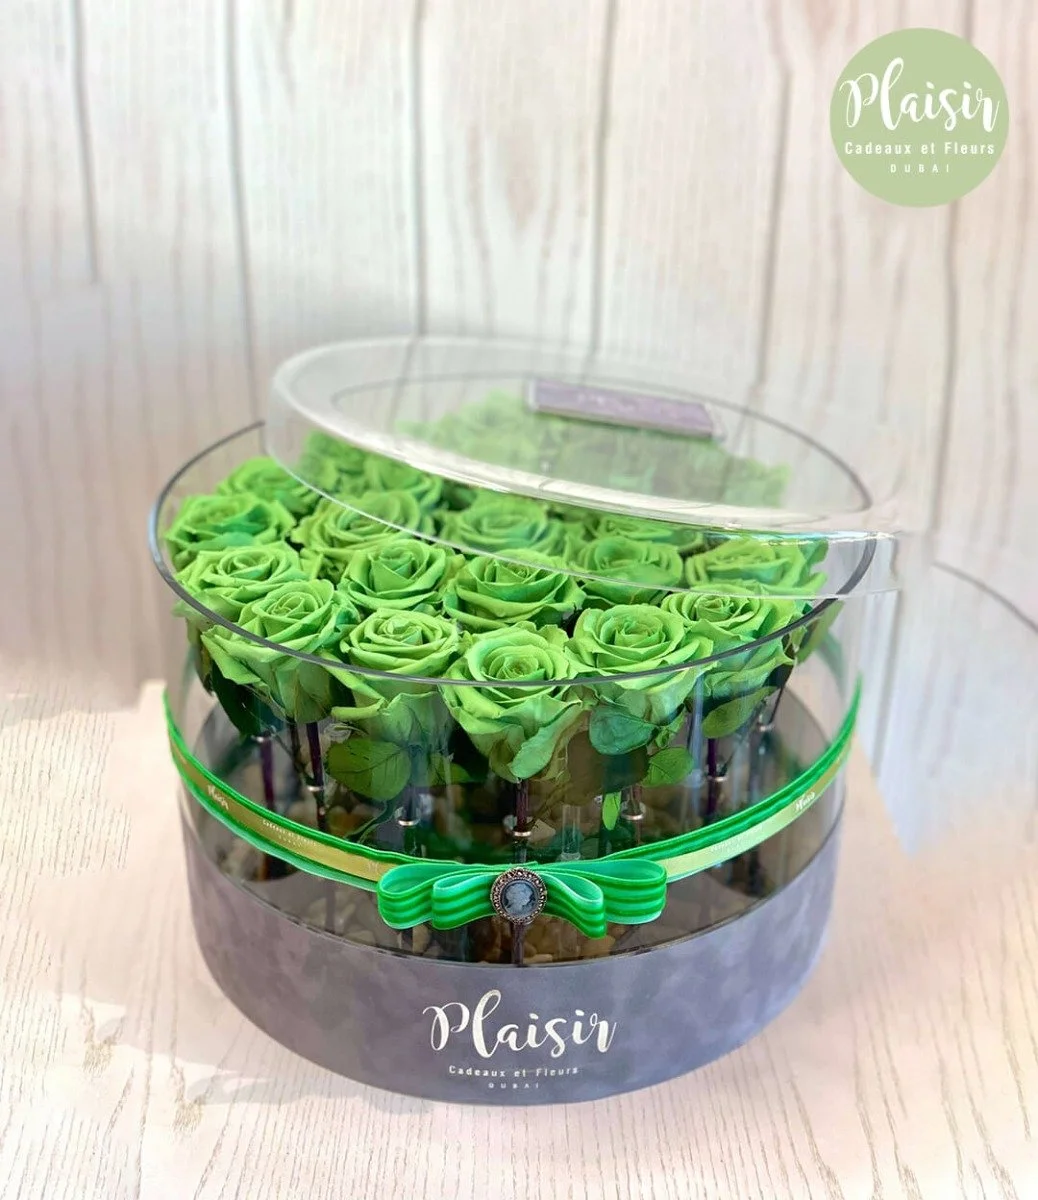 Green Infinity Roses in Round Acrylic By Plaisir